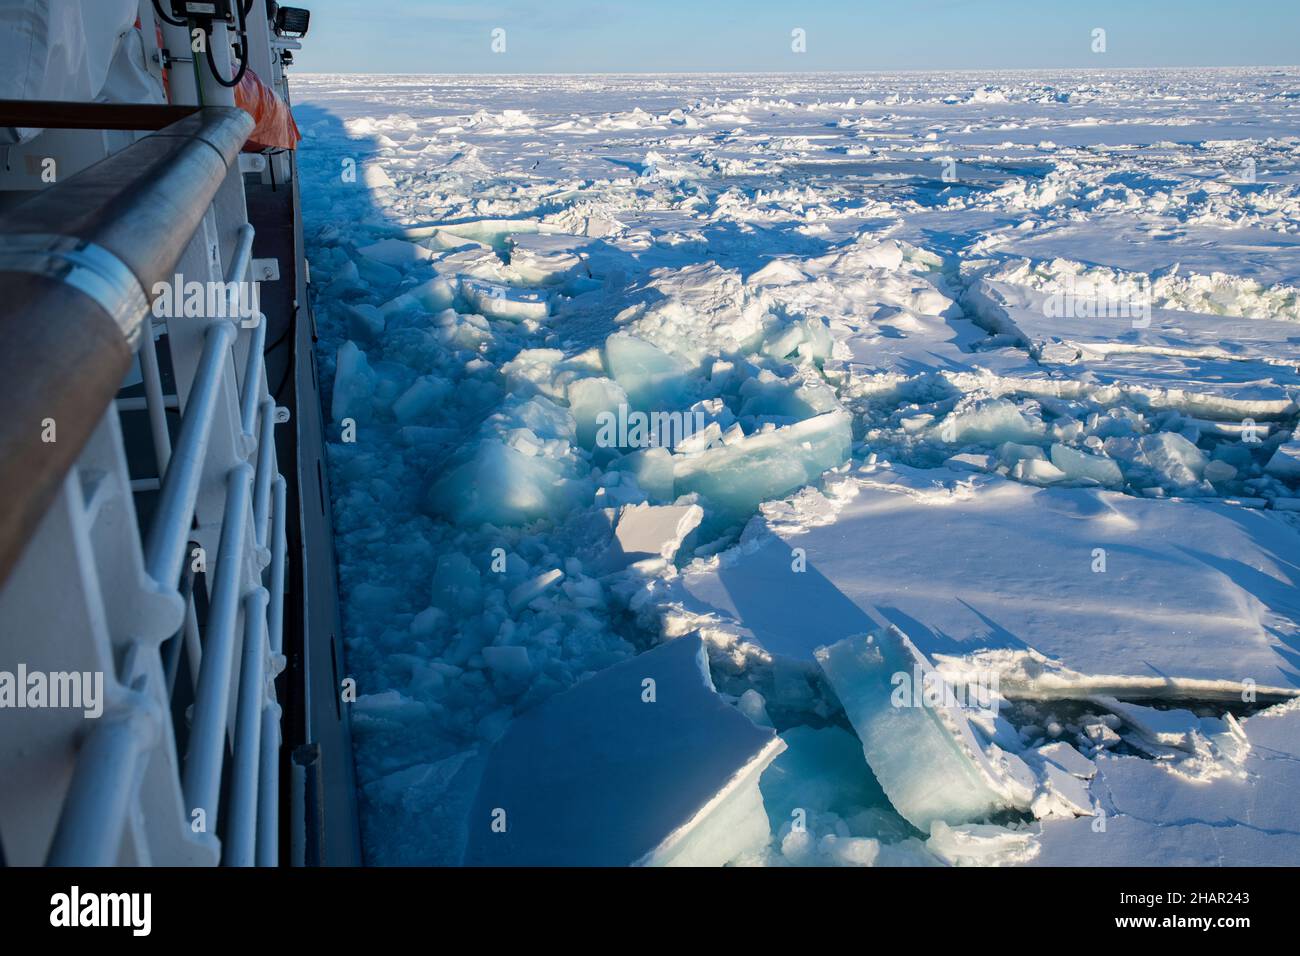 High Arctic, Le Commandant Charcot sailing through thick ice in polar landscape, green LNG icebreaker. Stock Photo